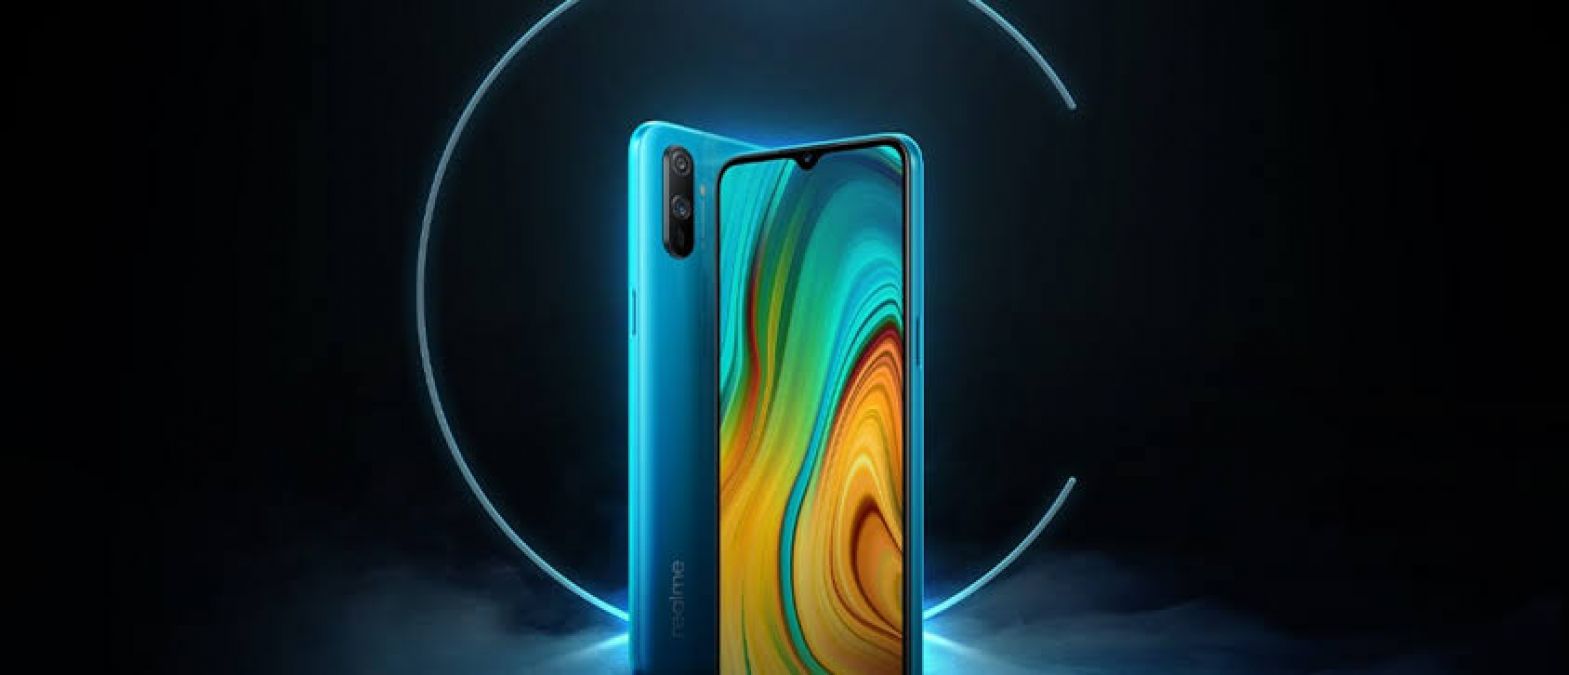 Realme C3: This feature will give new experience to this smartphone users